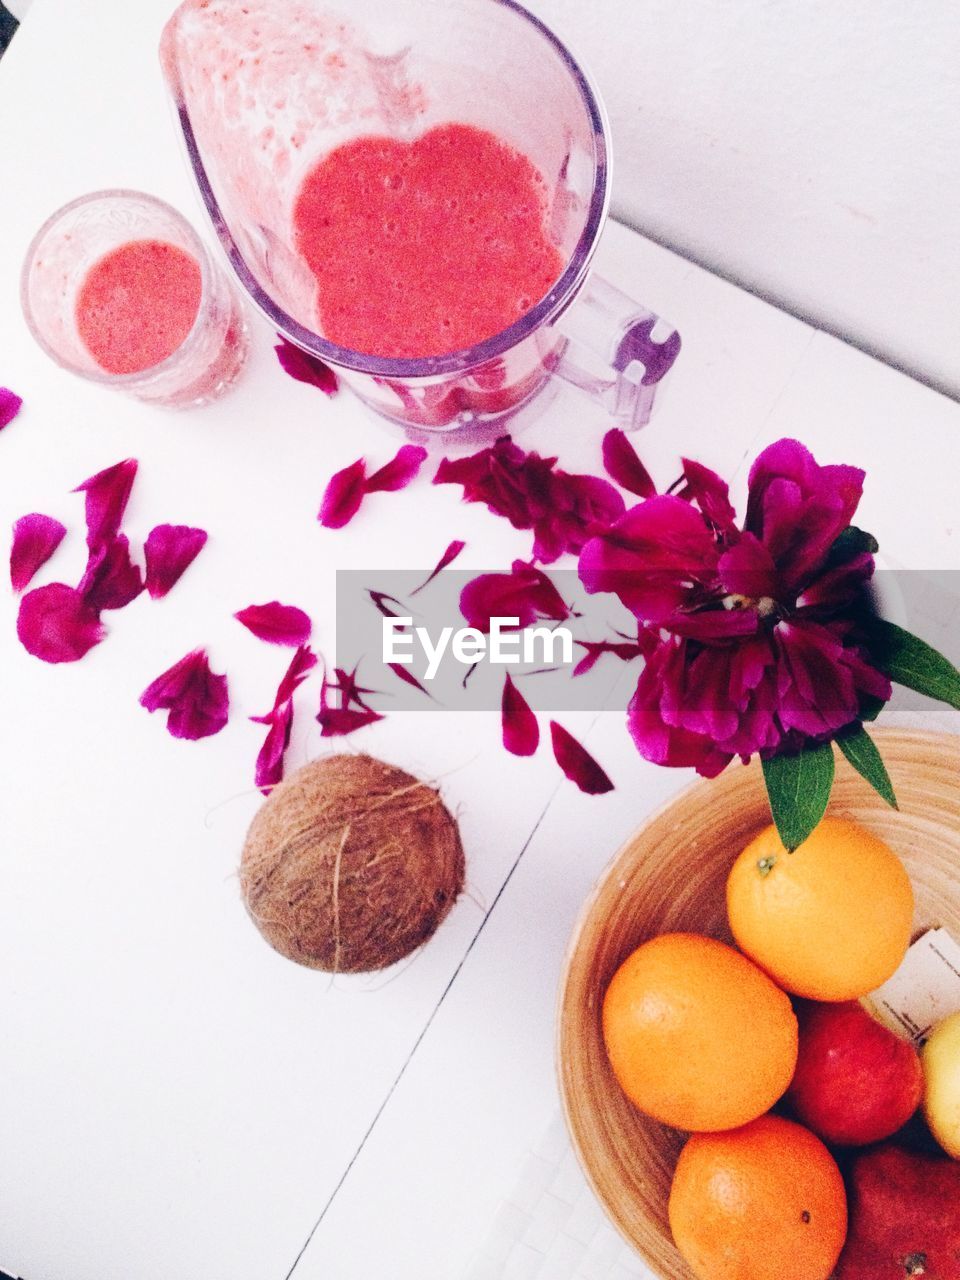 Smoothie in blender surrounded by flower petals